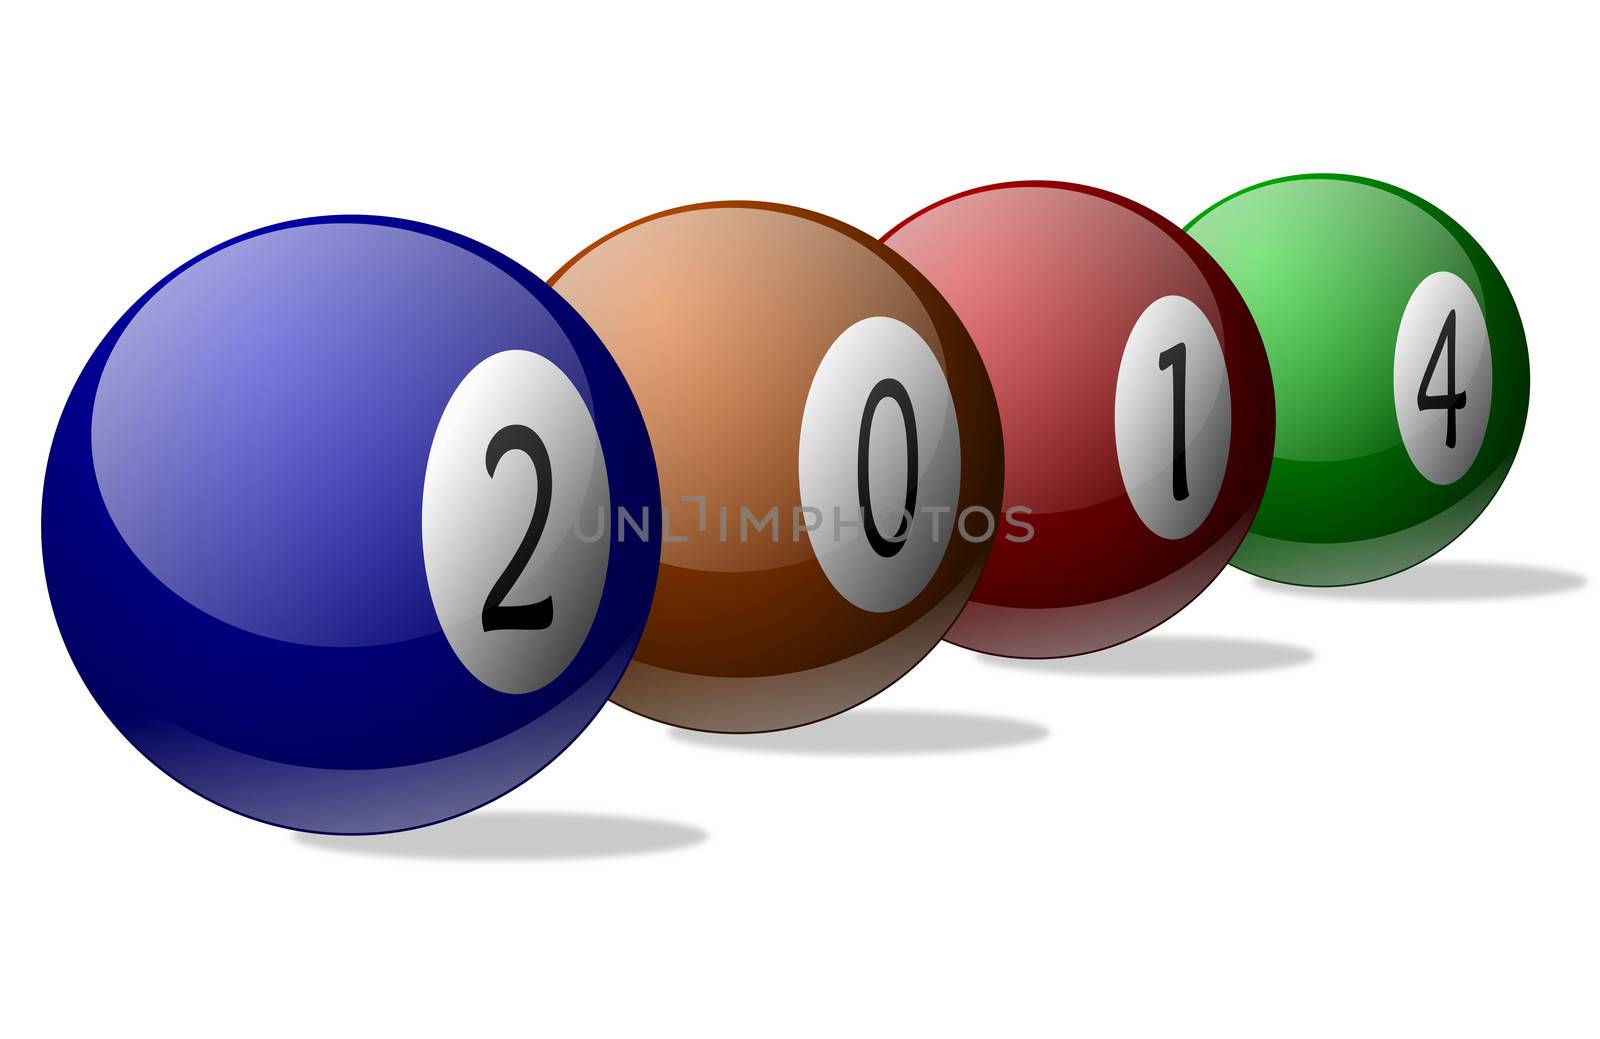 New Year 2014 on Pool Balls by RichieThakur